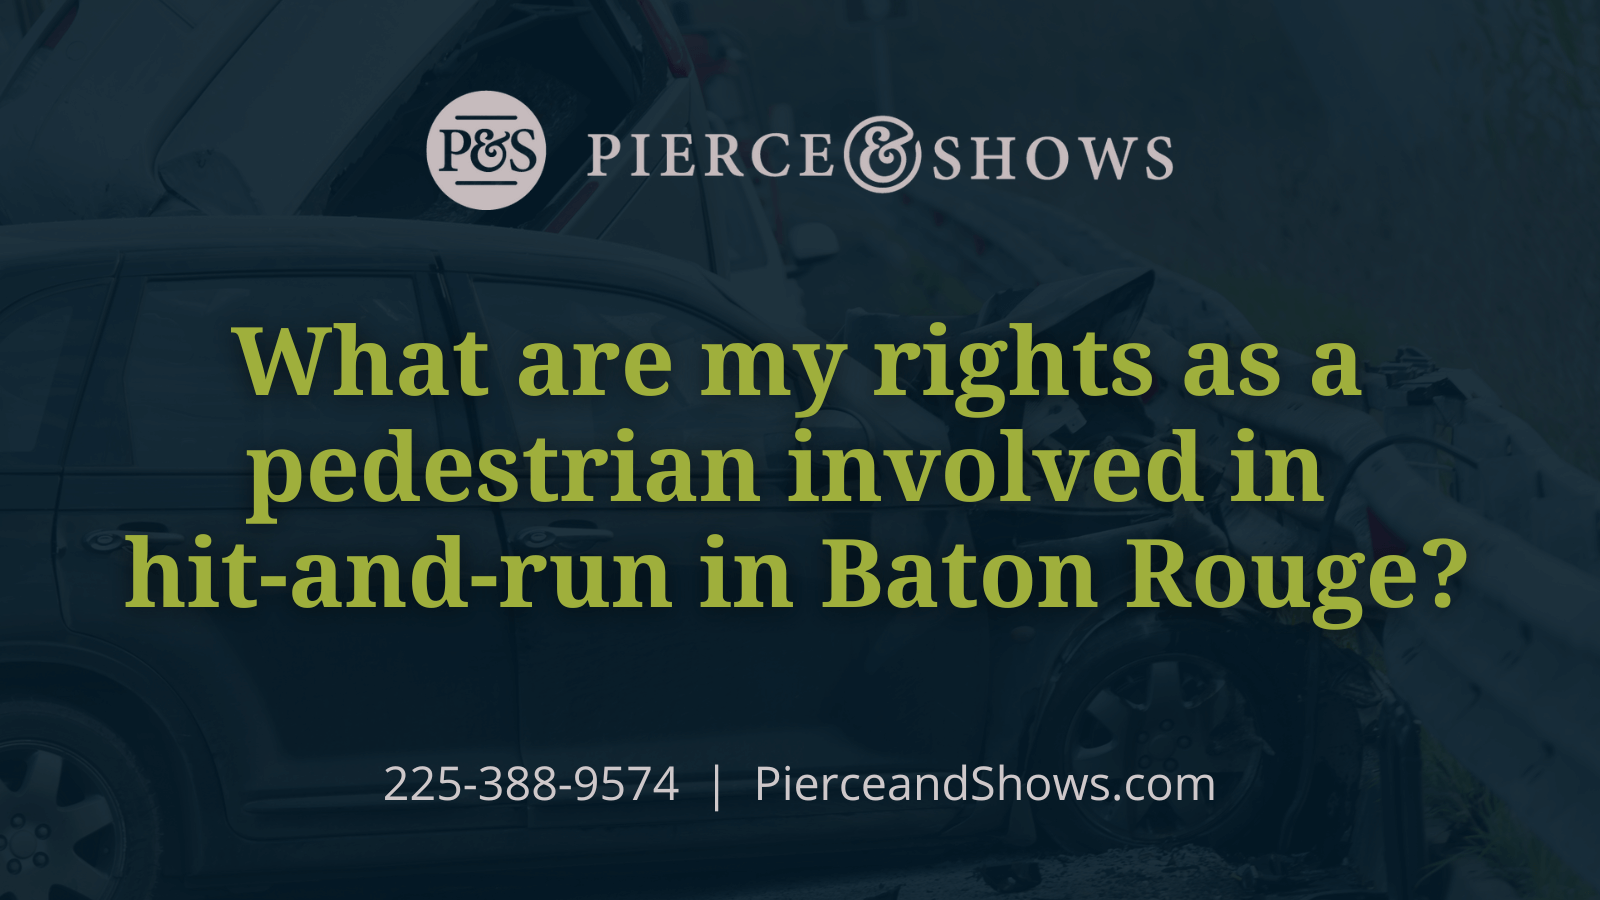 What are my rights as a pedestrian involved in hit-and-run in Baton Rouge - Baton Rouge Louisiana injury attorney Pierce & Shows